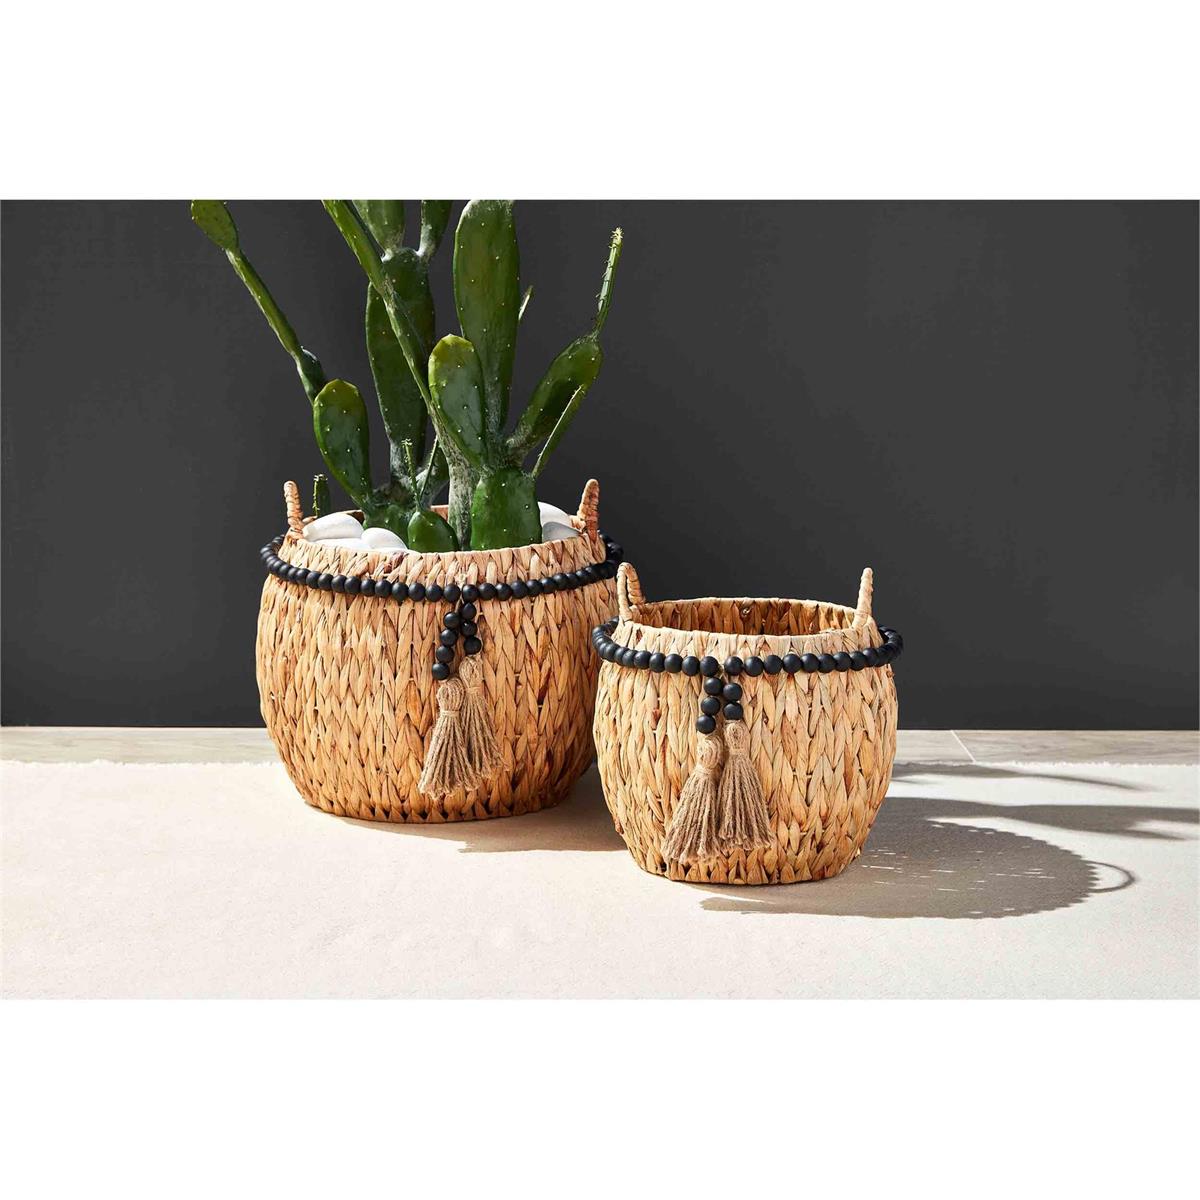 small and large hyacinth beaded tassel baskets, one with a potted cactus on a white floor against a black background